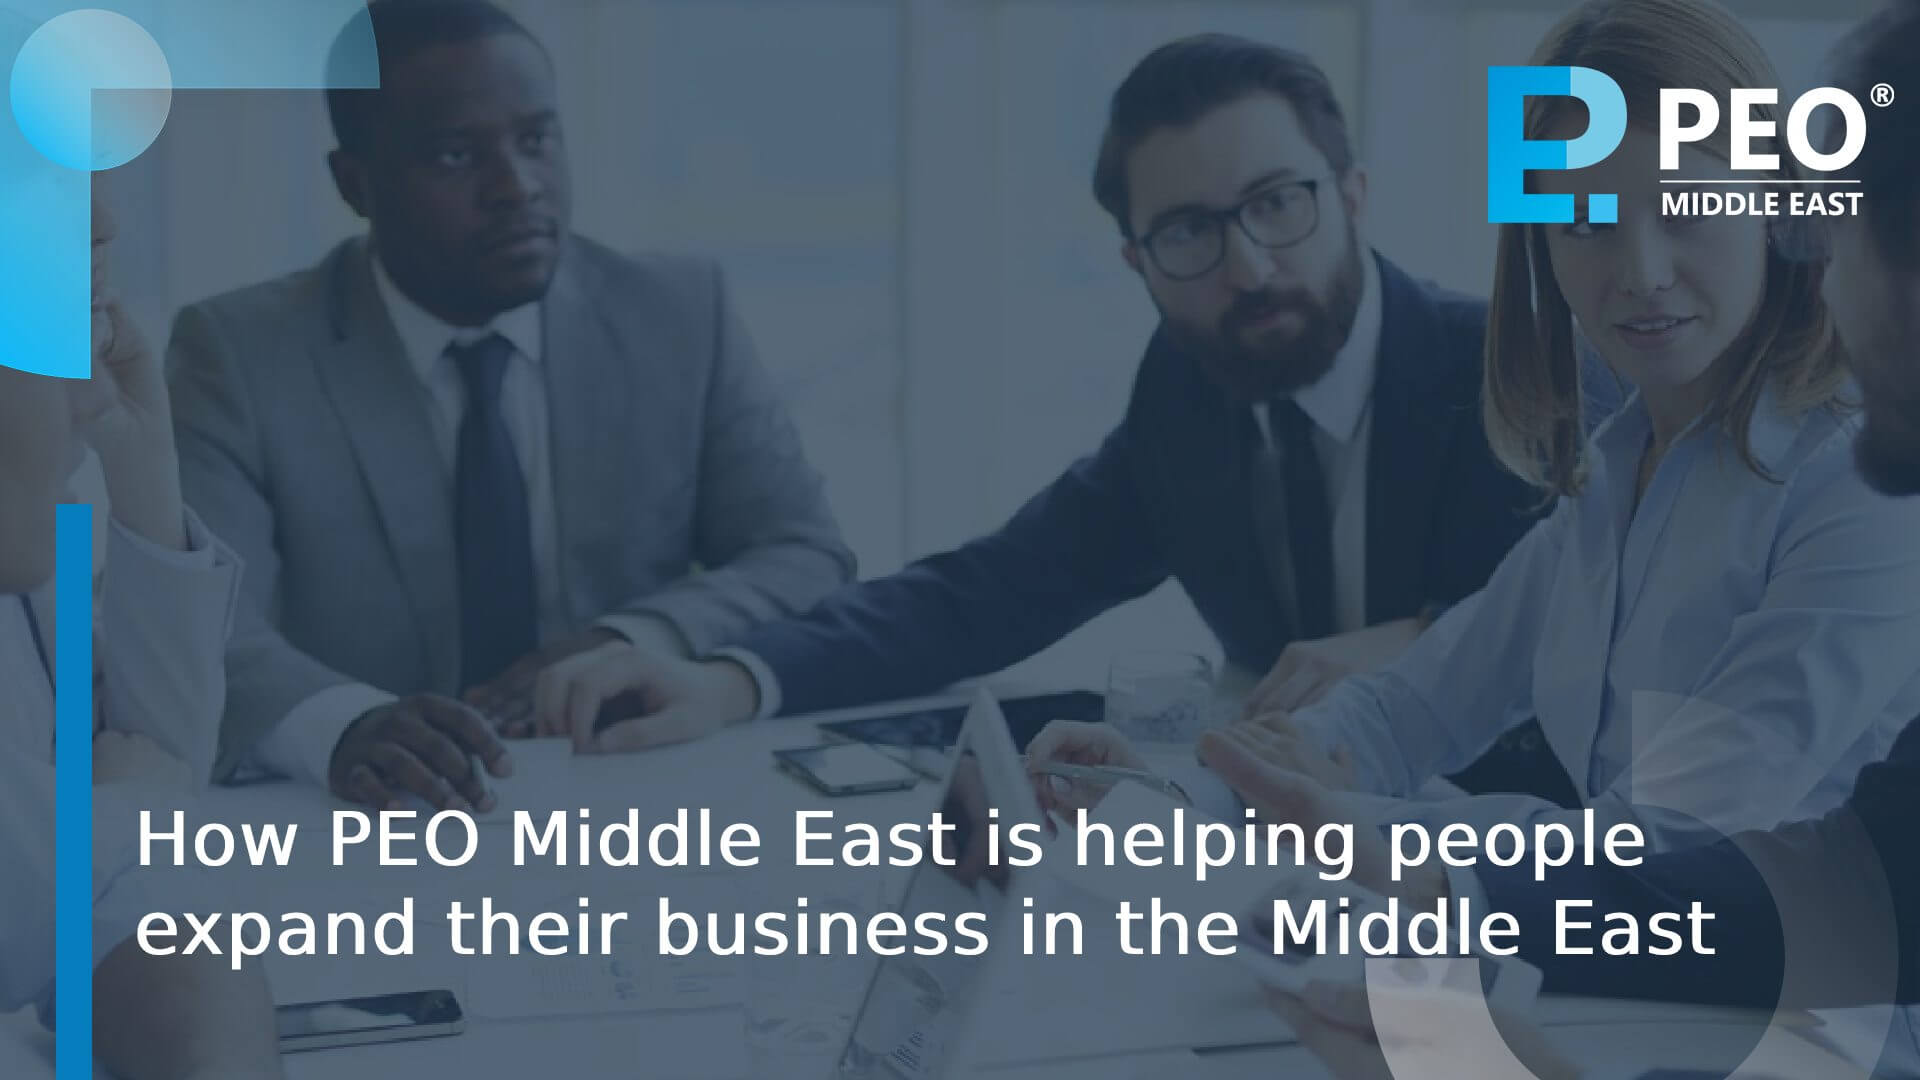 business in the Middle East